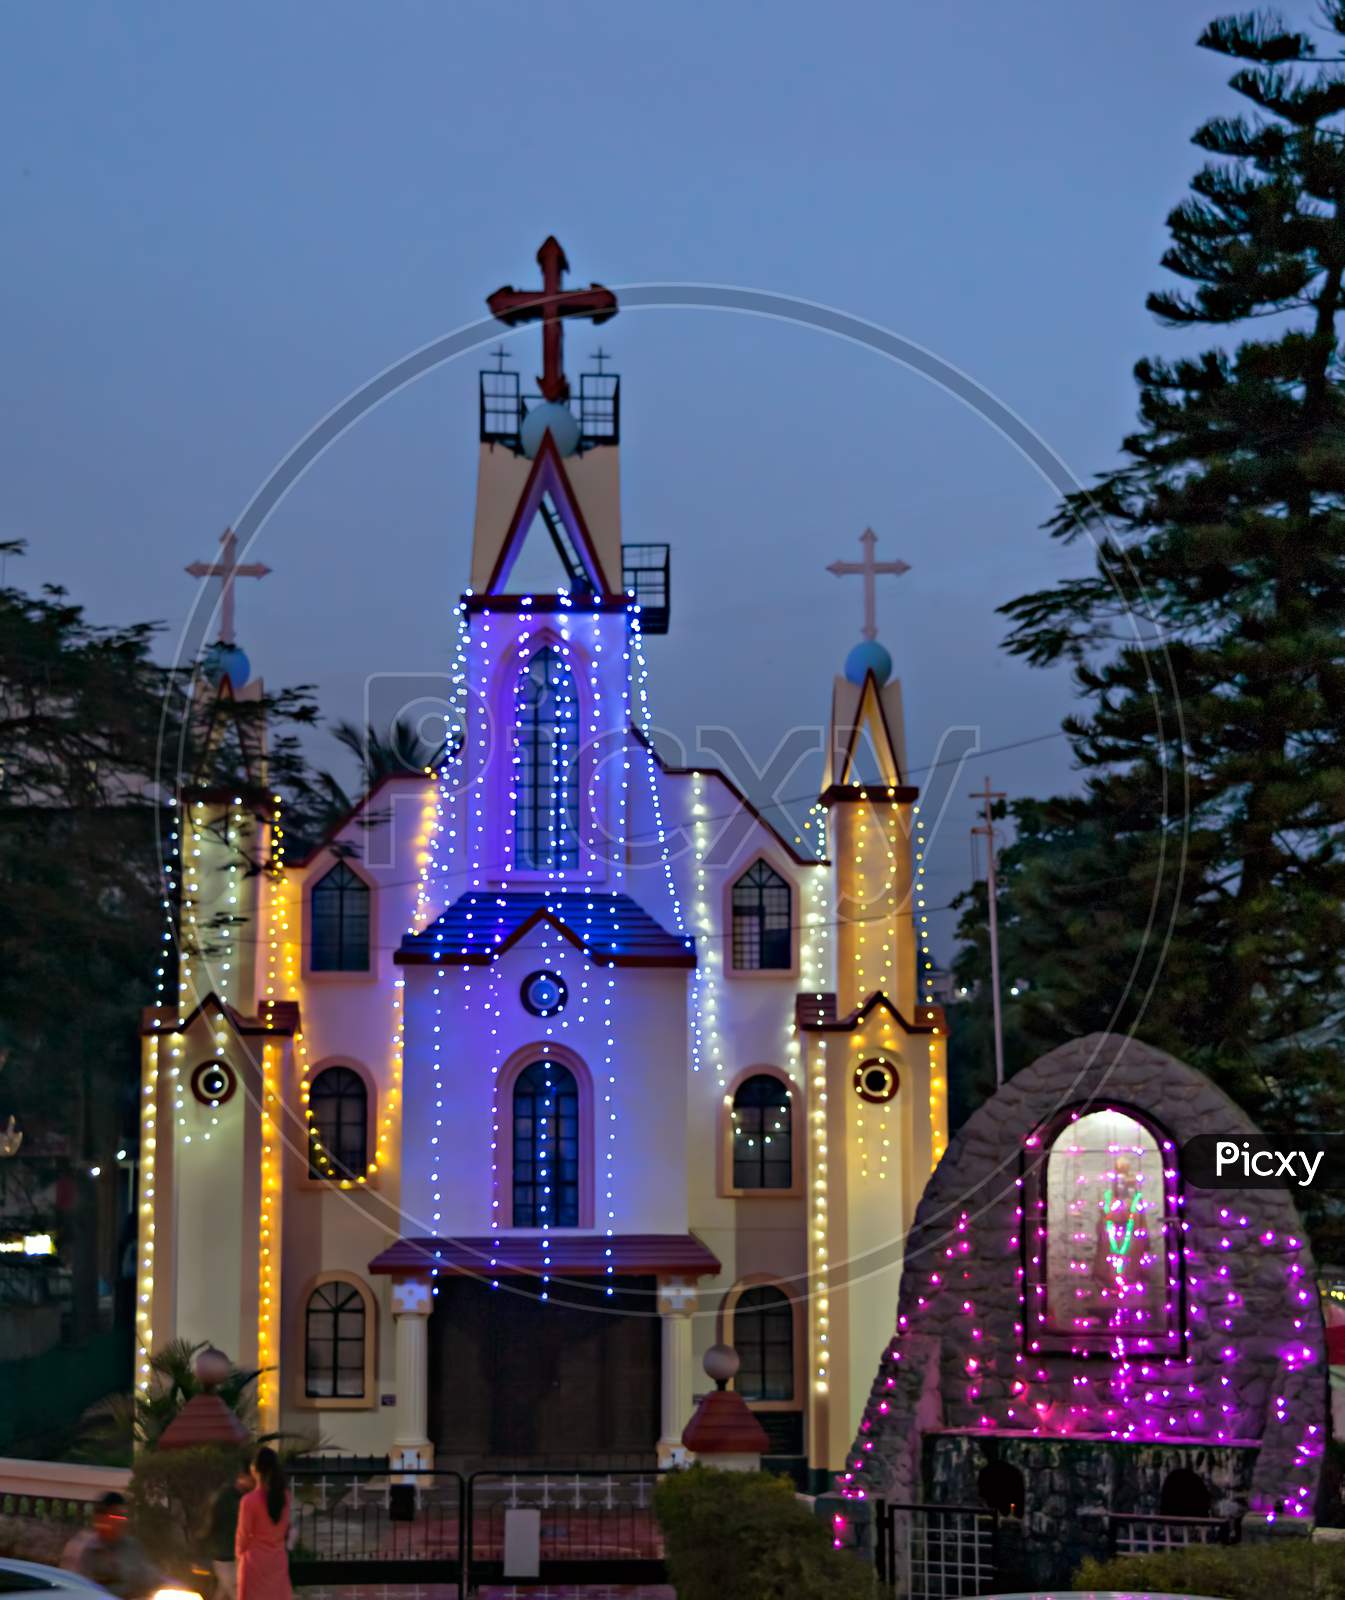 Lighting Done On Church On The Occasion Of Christmas In Warje, Pune, India.